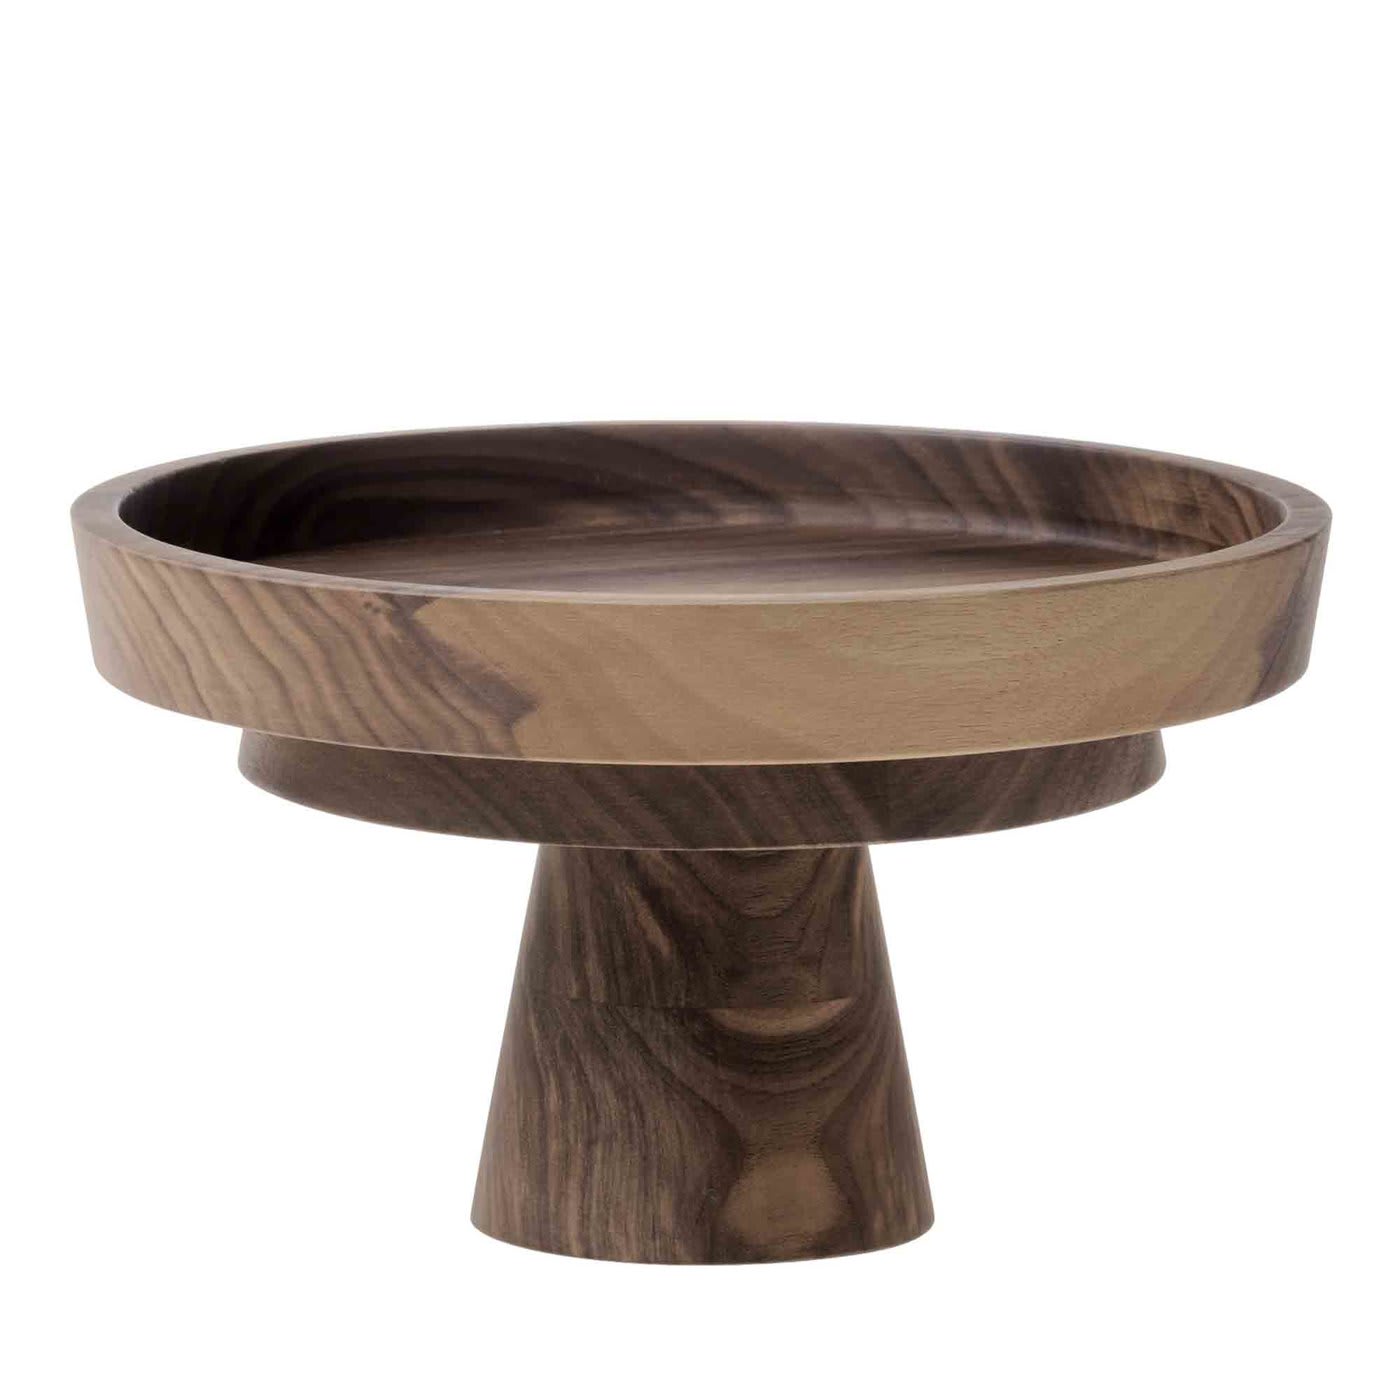 Tall Cake Stand in Canaletto Walnut - Mun